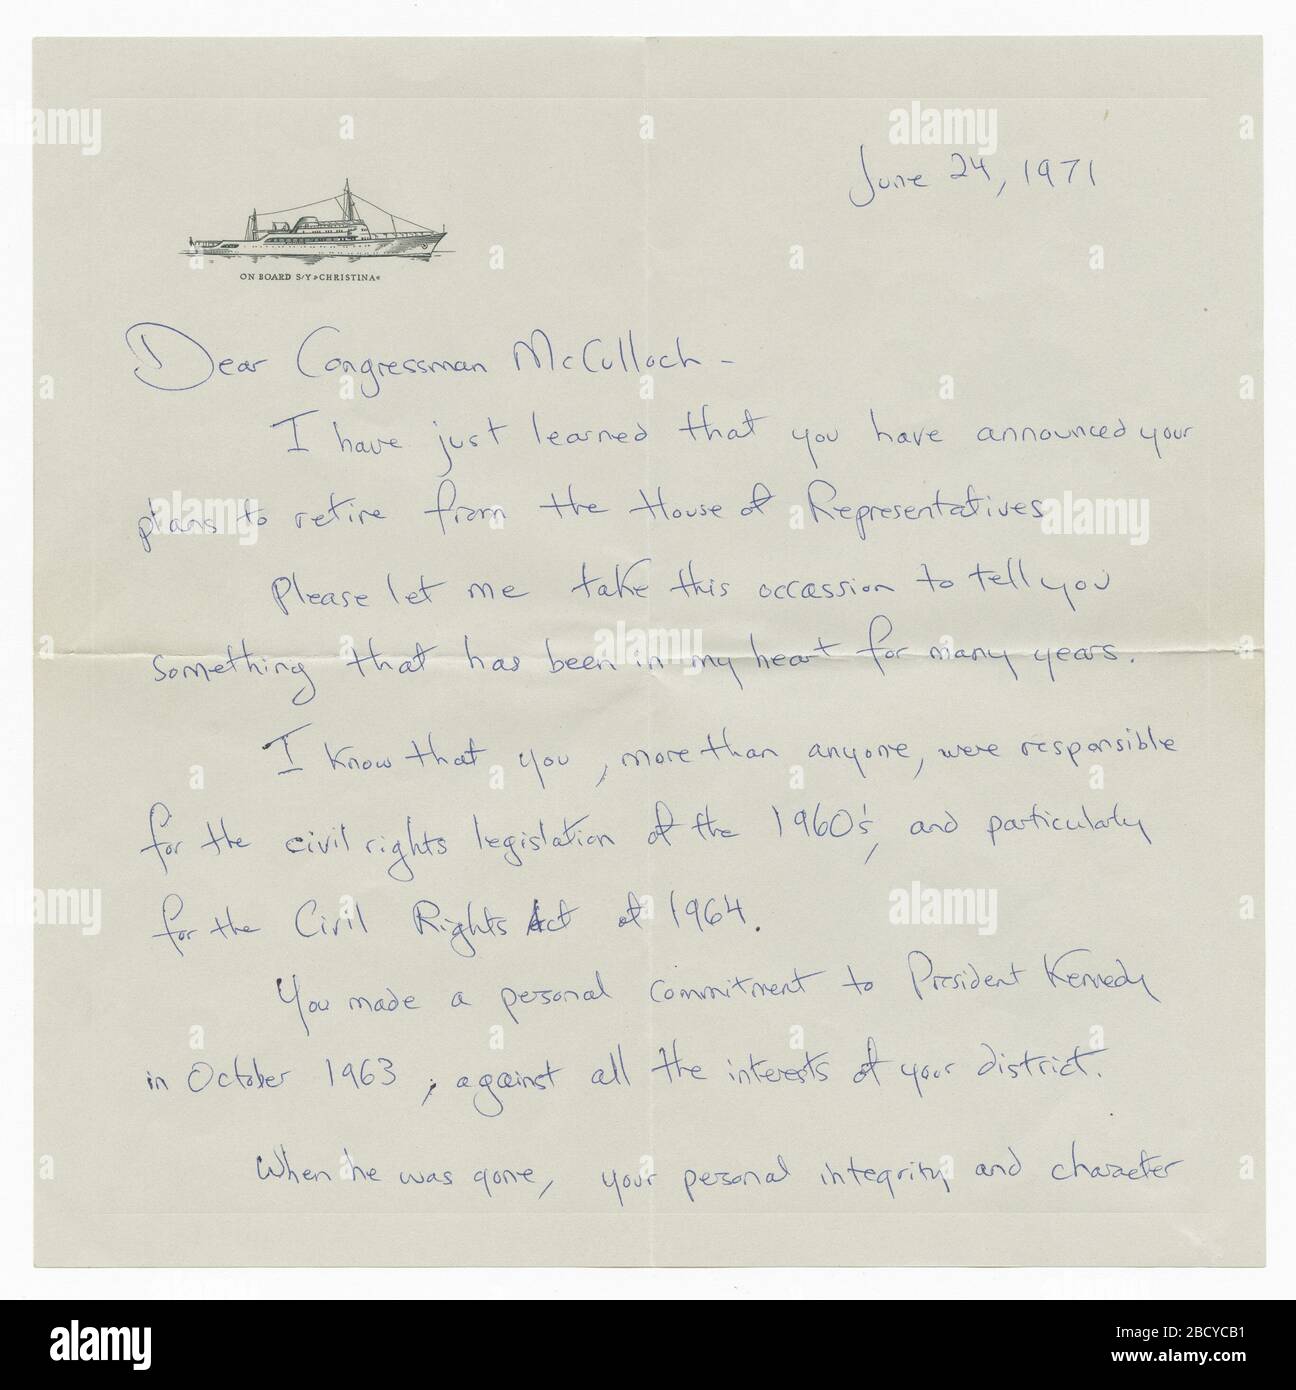 Letter from Jacquelyn Kennedy Onassis to Congressman William McCulloch. This three-page letter (abc) and envelope (d) from Jacquelyn Kennedy Onassis is addressed to Congressman William McCulloch of Ohio. Onassis thanks him for his support of the Civil Rights Act of 1964 and for supporting her husband, President John. F. Kennedy. Letter from Jacquelyn Kennedy Onassis to Congressman William McCulloch Stock Photo